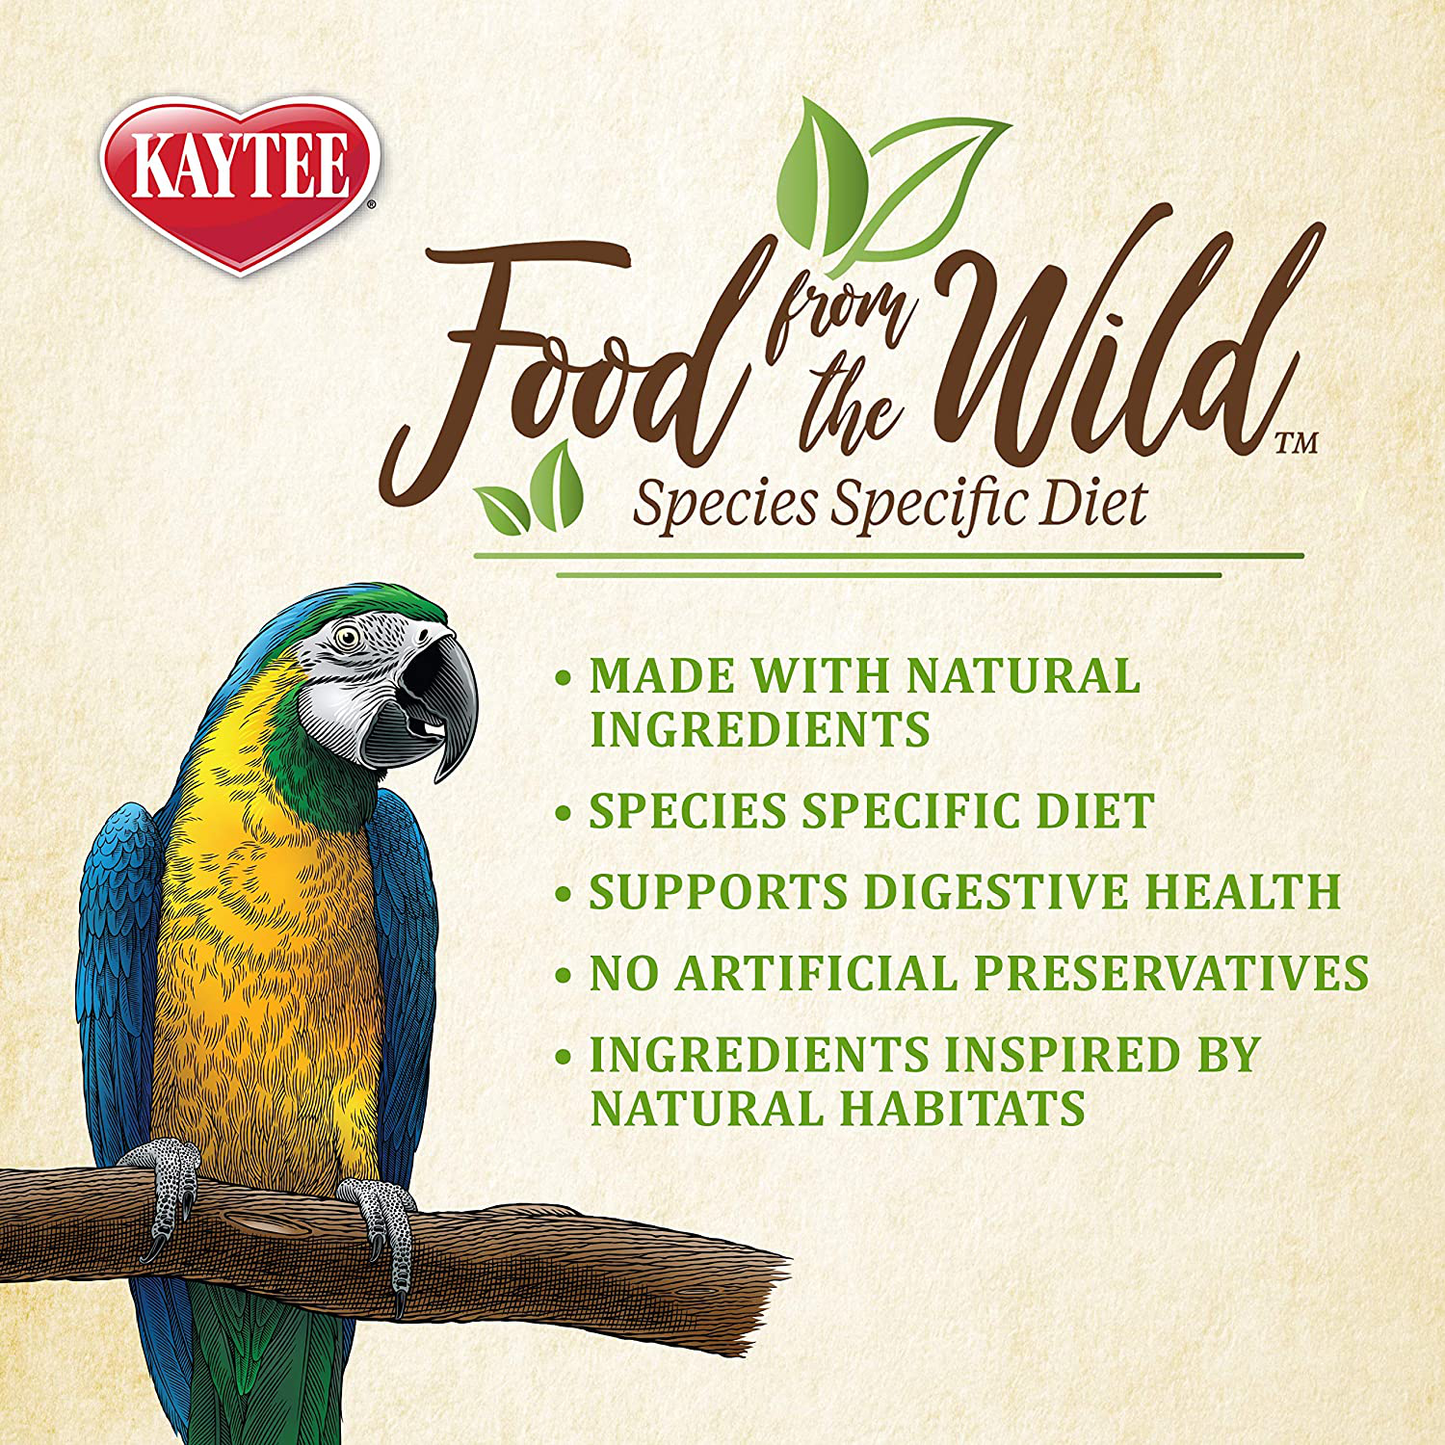 Kaytee Food from the Wild, Macaw Food, 2.5 Pounds